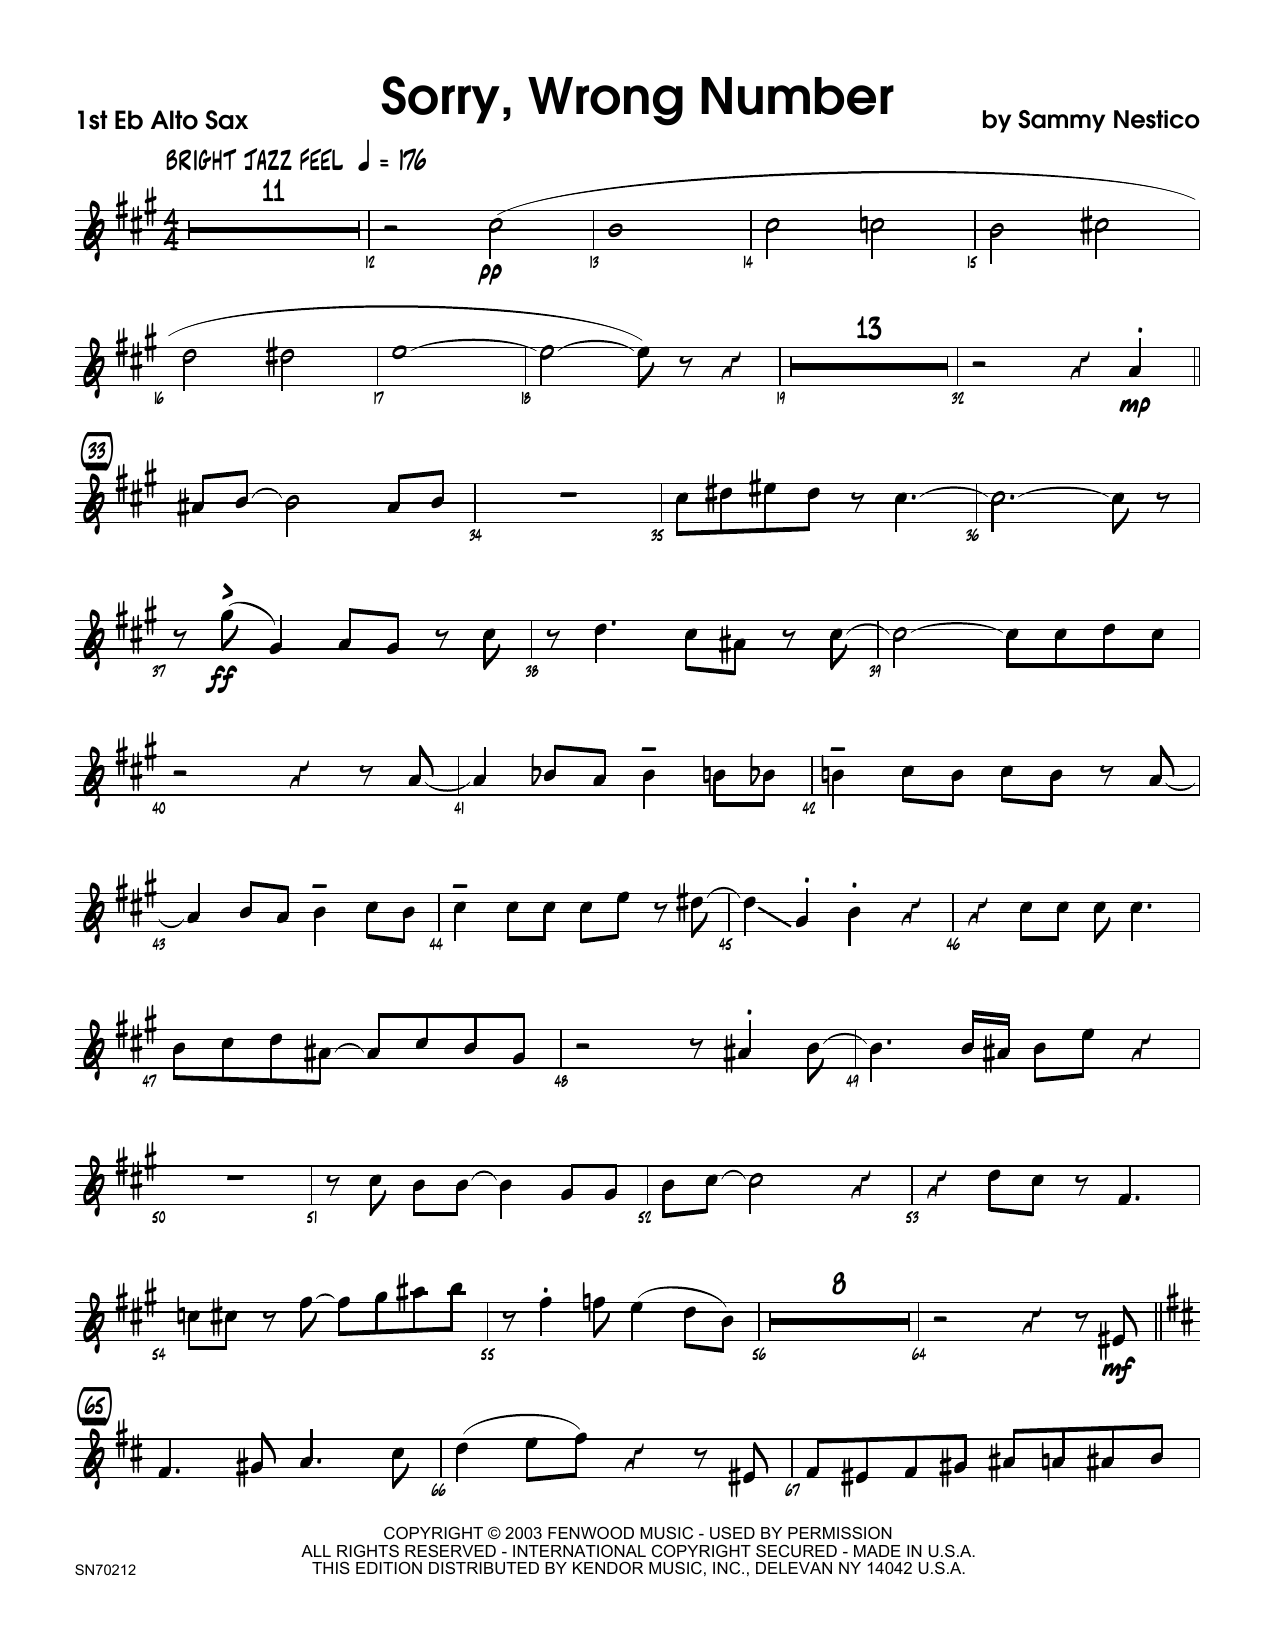 Download Sammy Nestico Sorry, Wrong Number - 1st Eb Alto Saxop Sheet Music